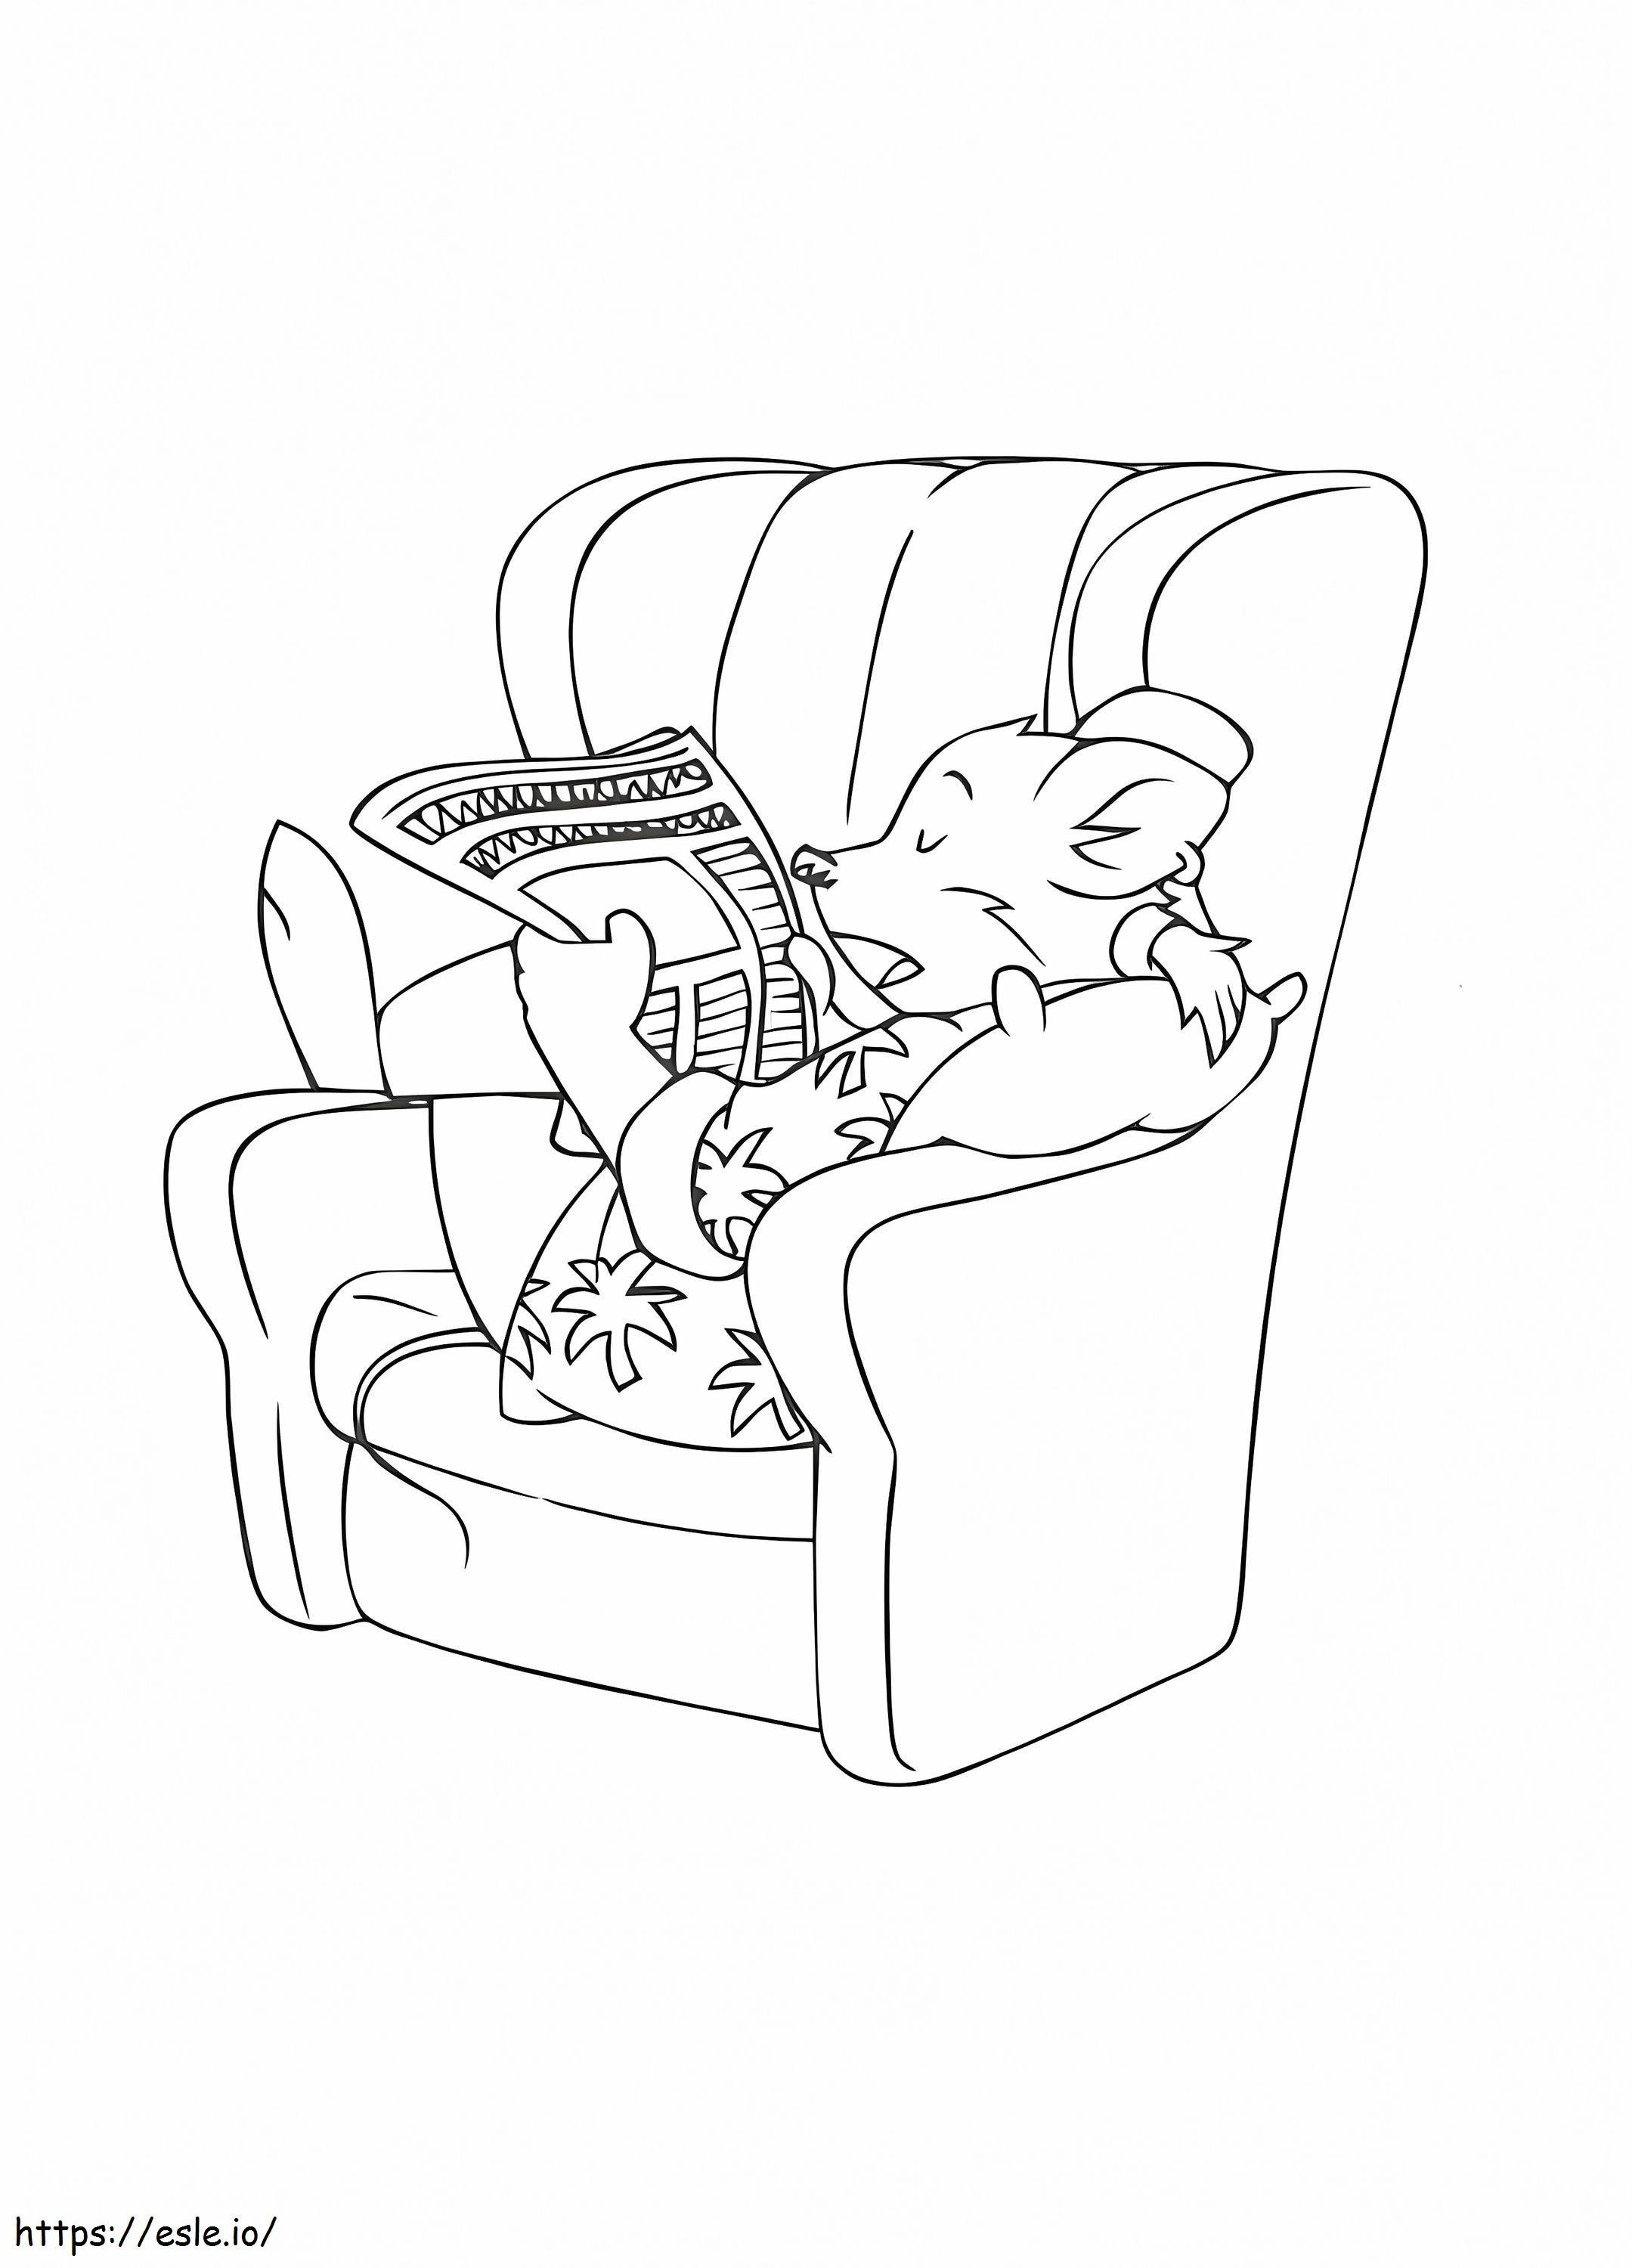 Trap From Geronimo Stilton coloring page